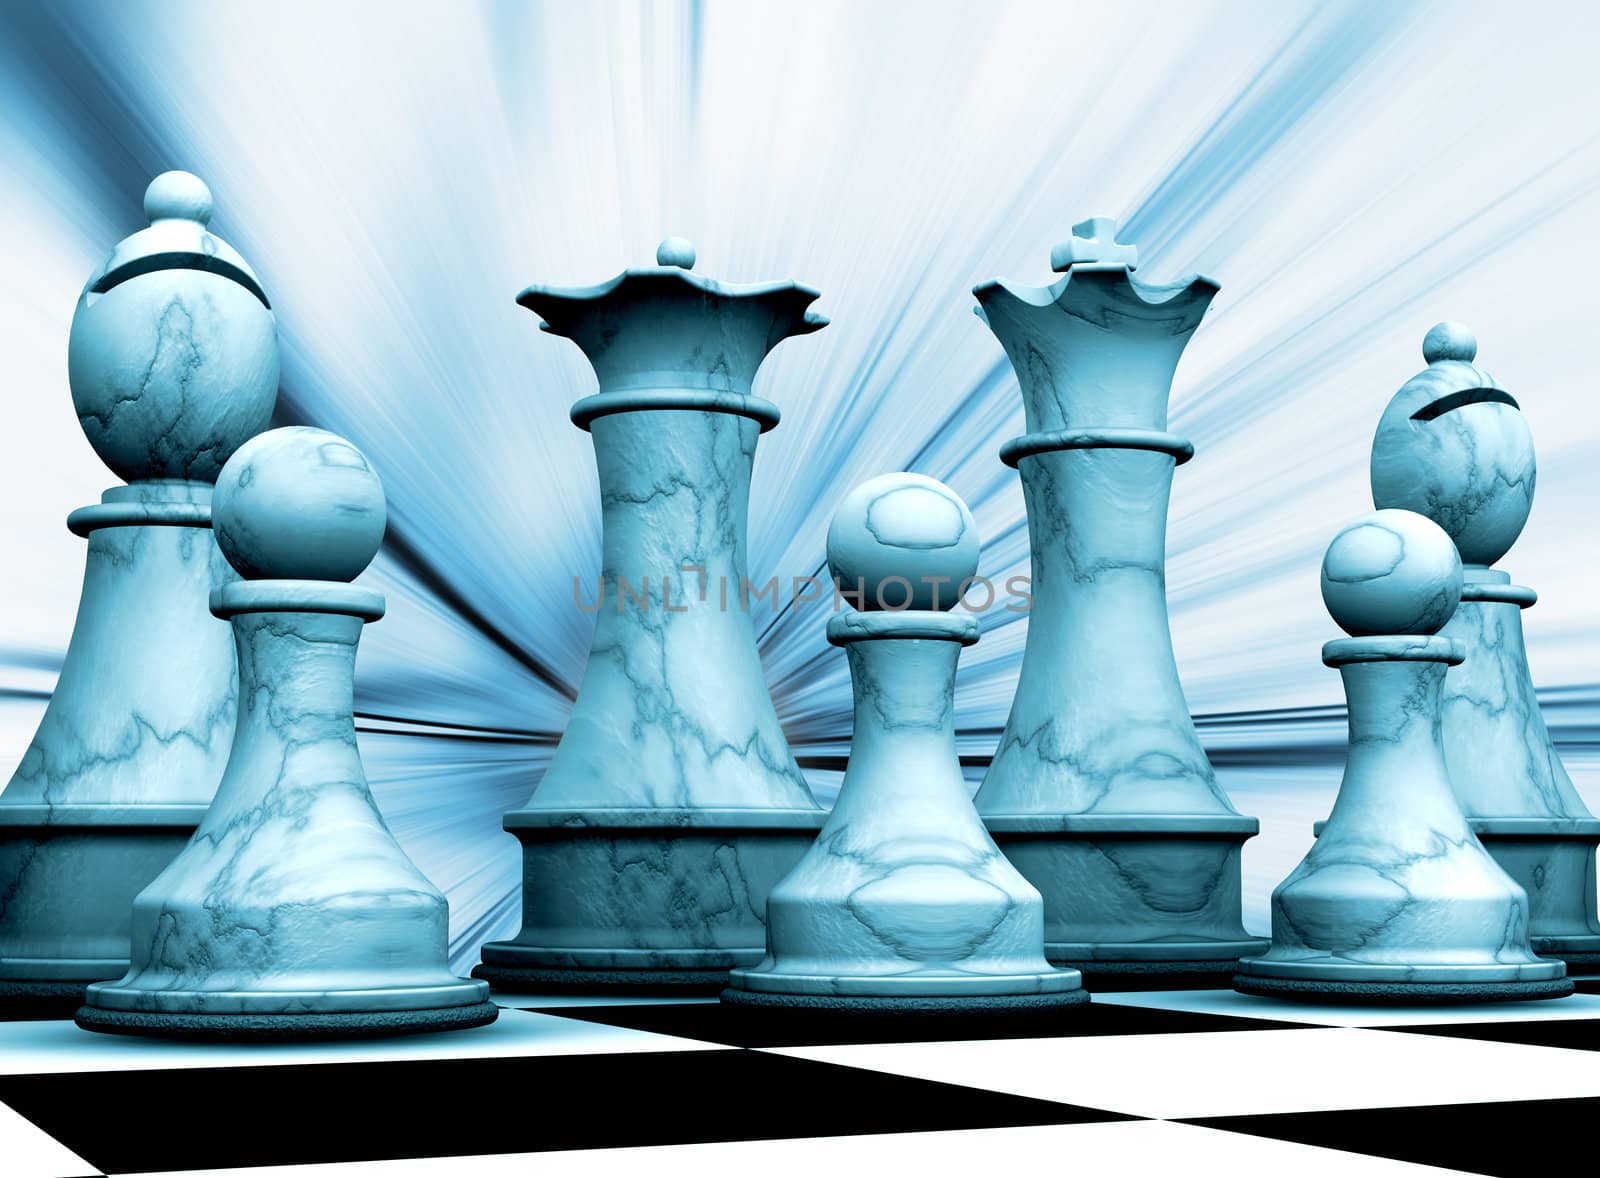 Abstract background with chess pieces